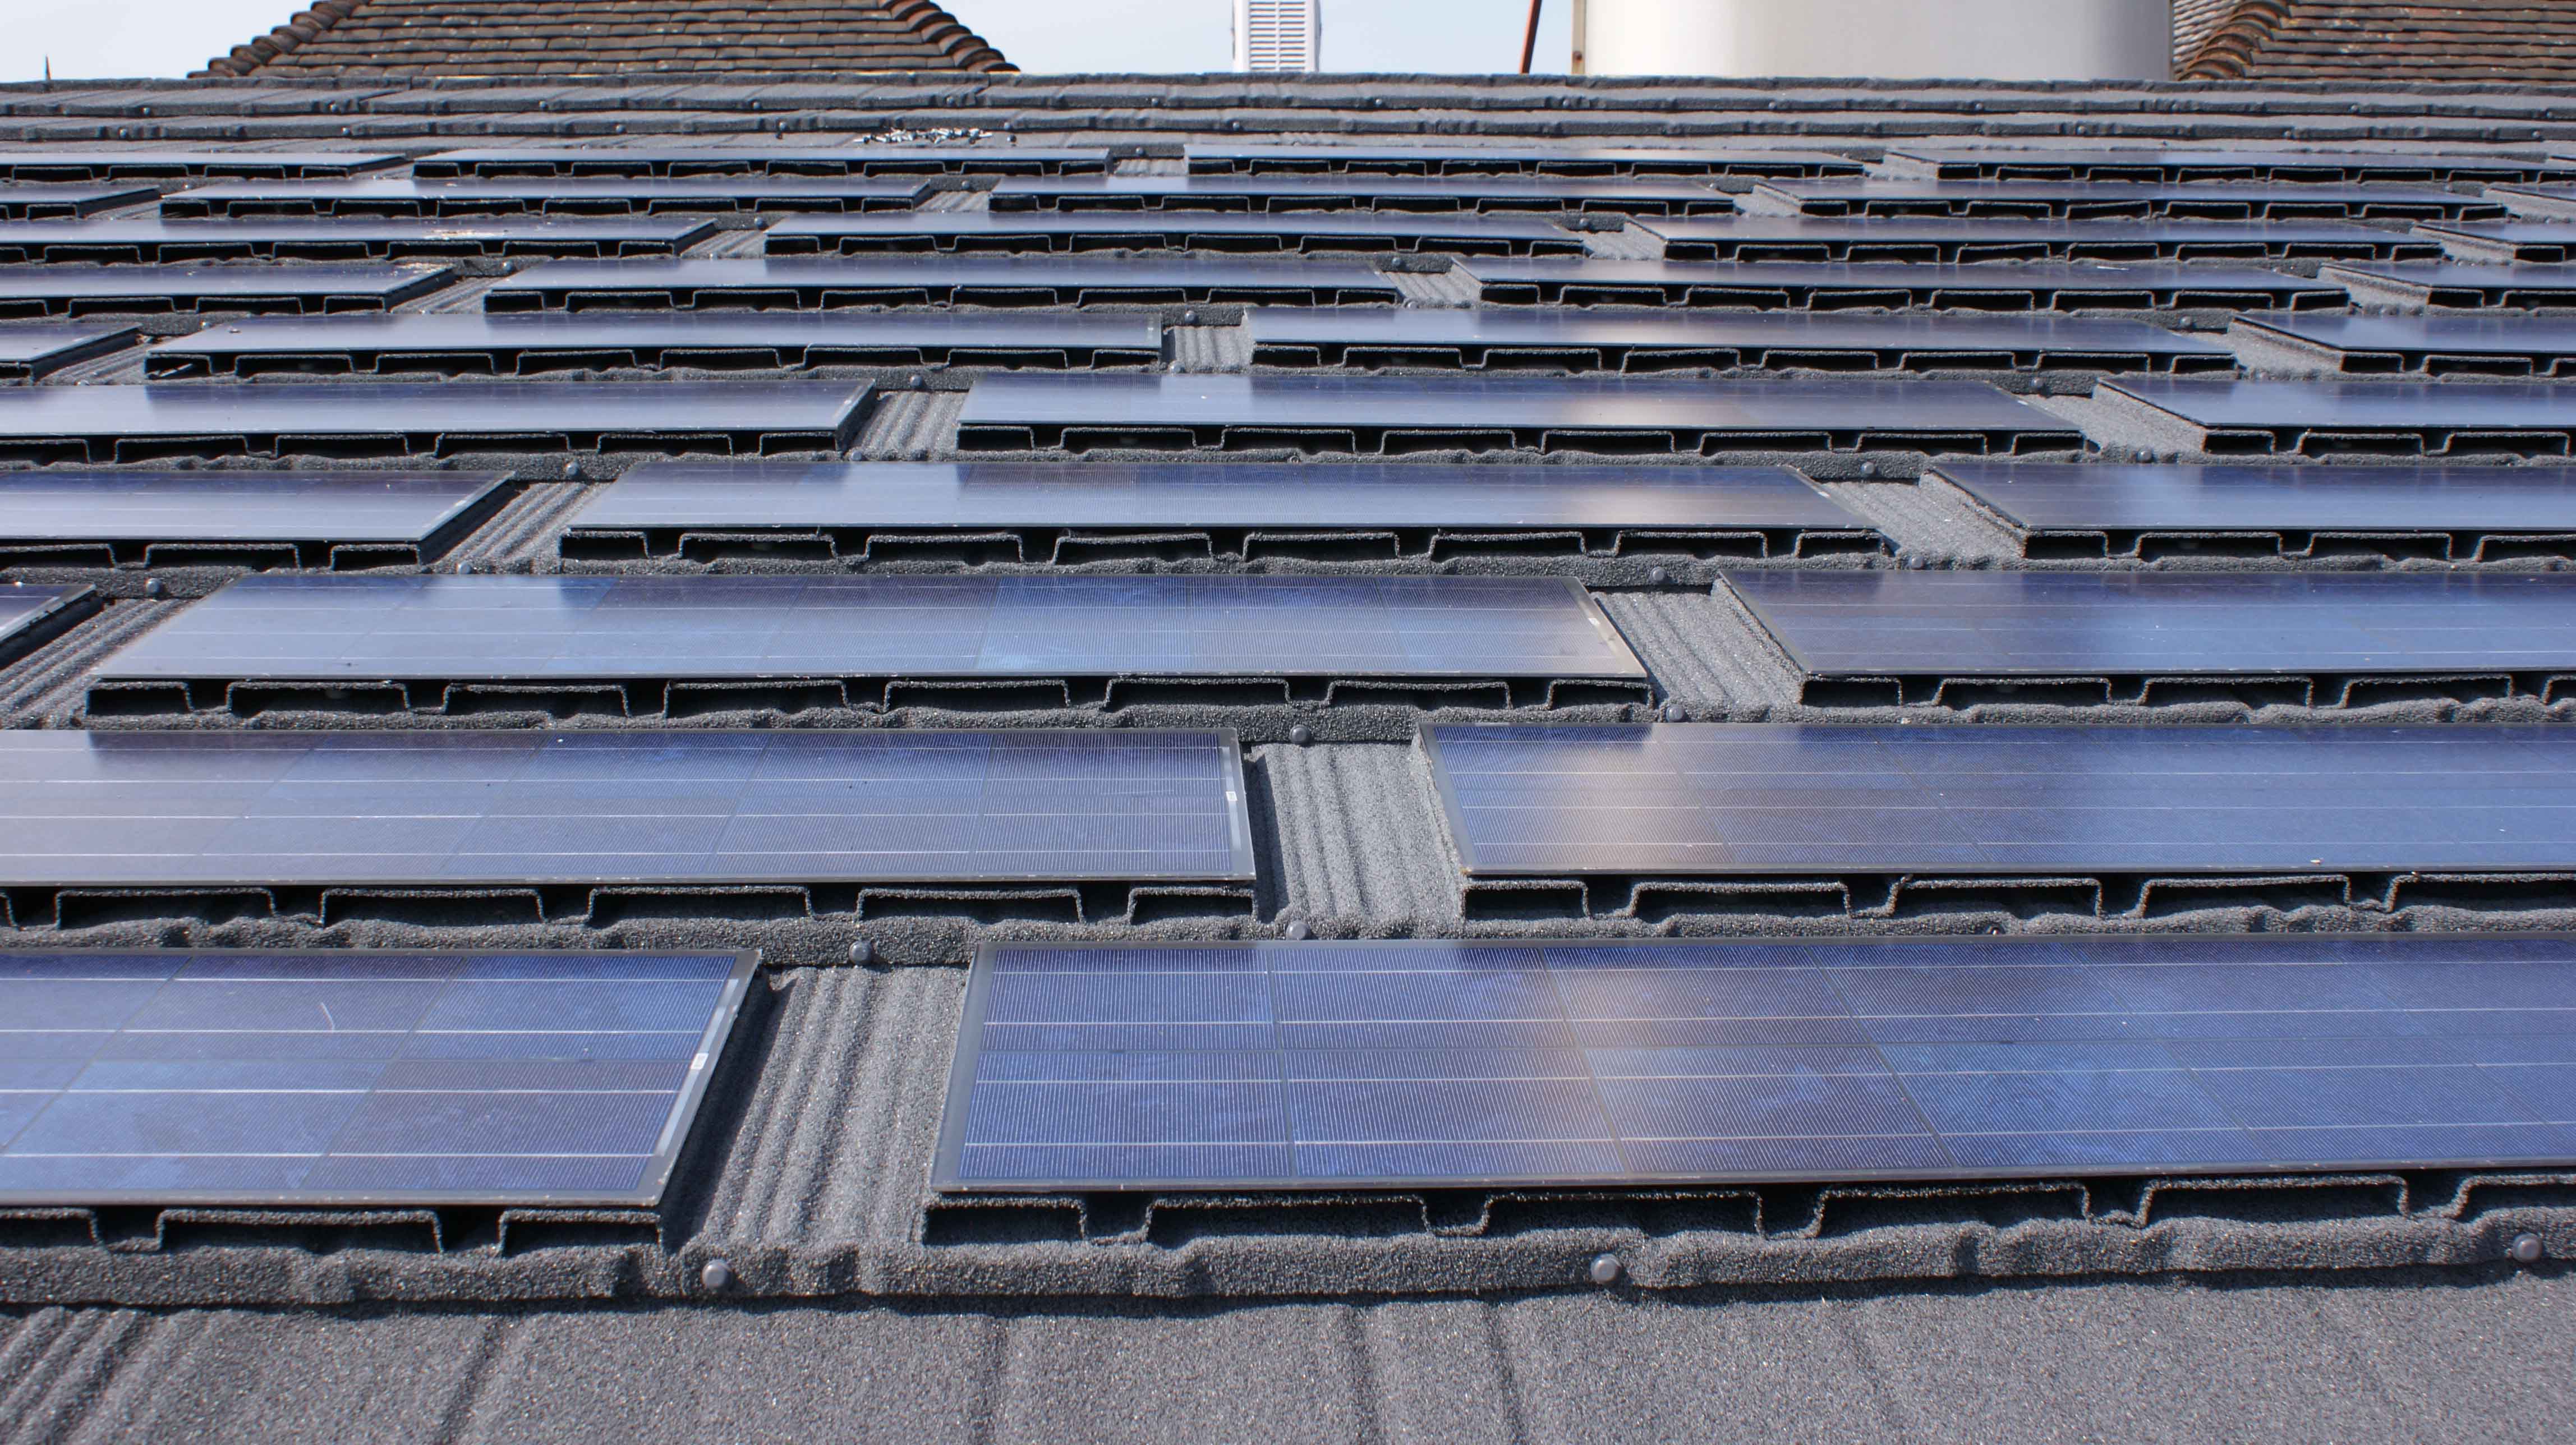 Southport College Roofing Refurbishment Charcoal Slate with Integrate Photovoltaic System